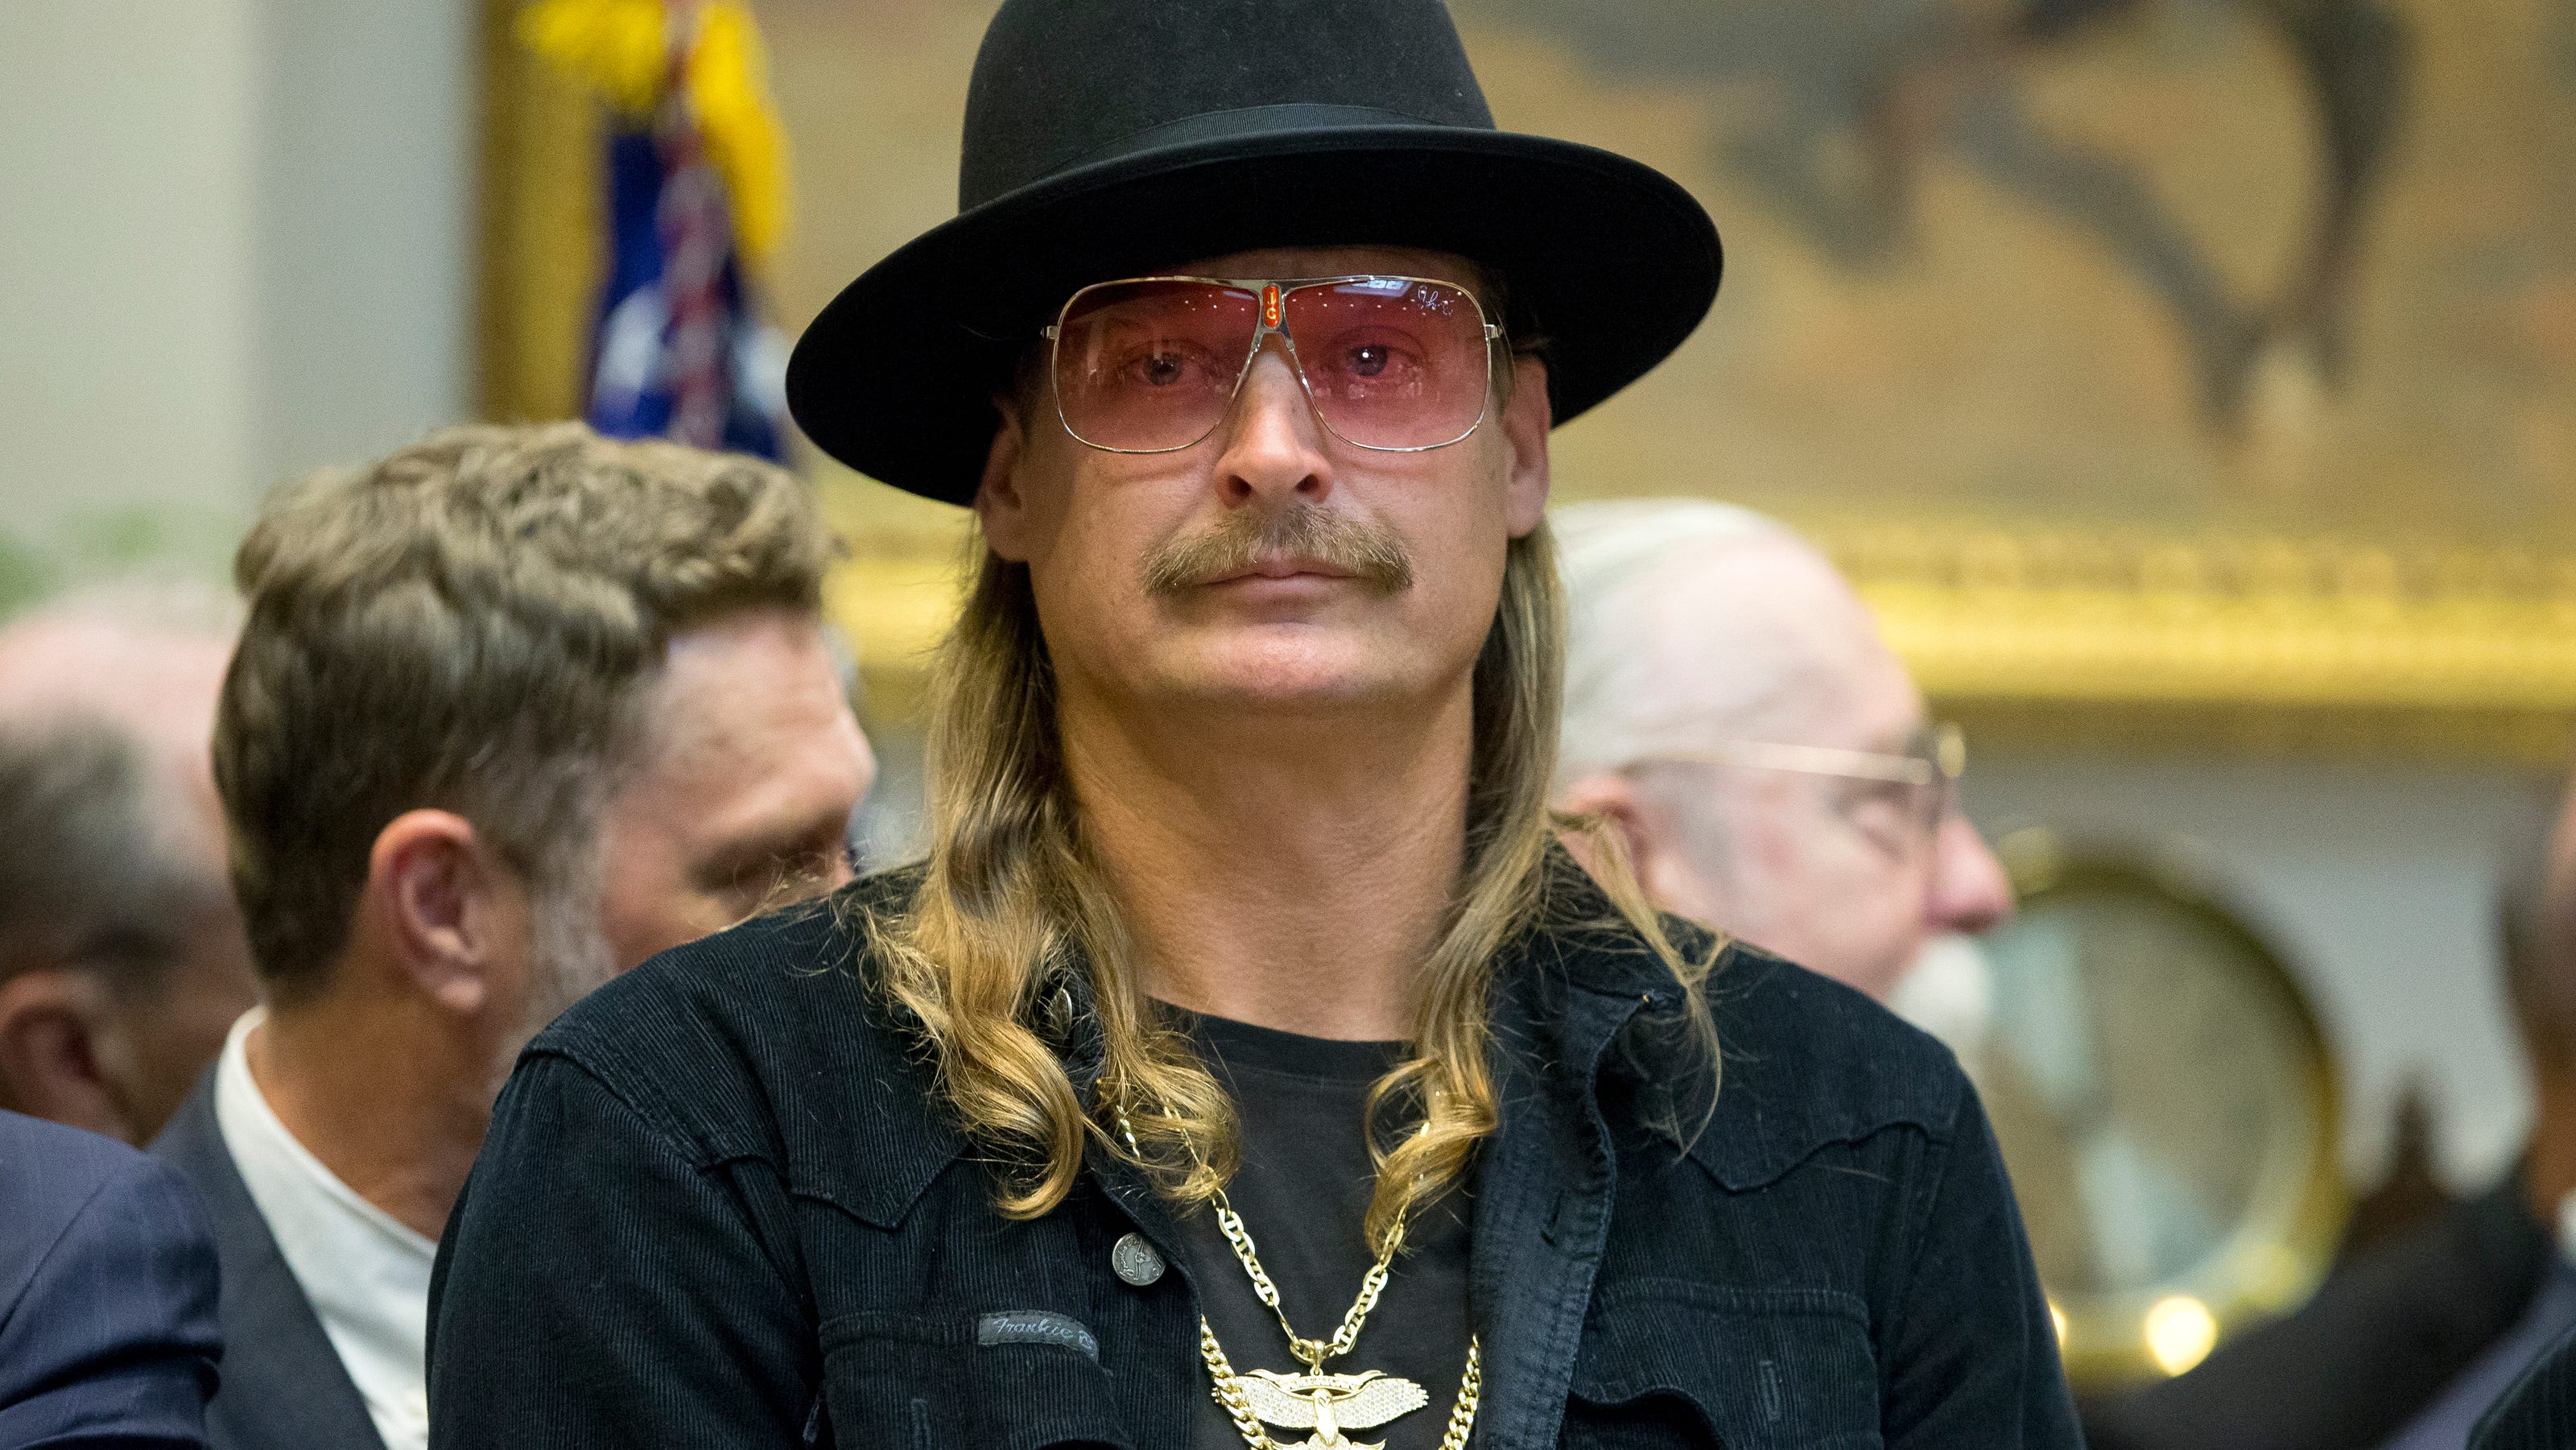 Kid Rock's Made in Detroit eatery closing after profane Oprah comments